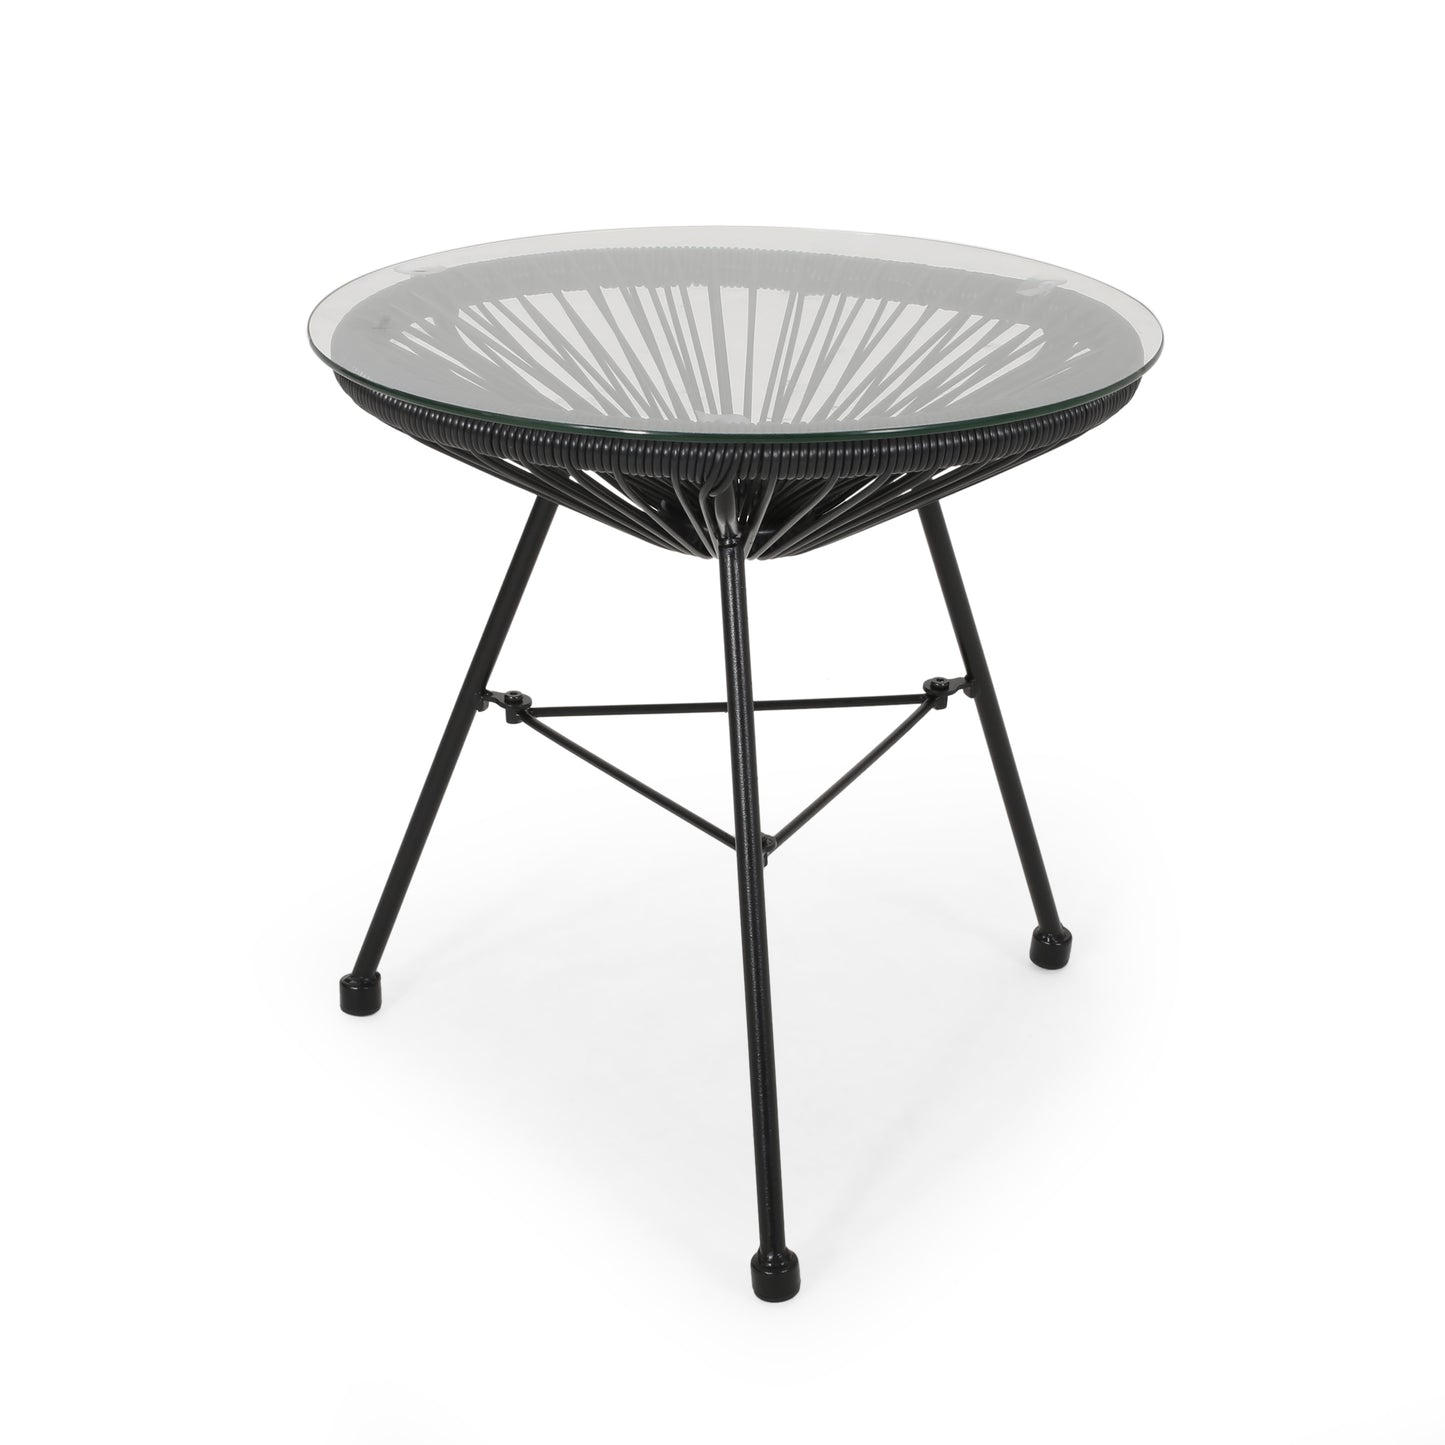 Chrissy Outdoor Modern Faux Rattan Side Table with Tempered Glass Top